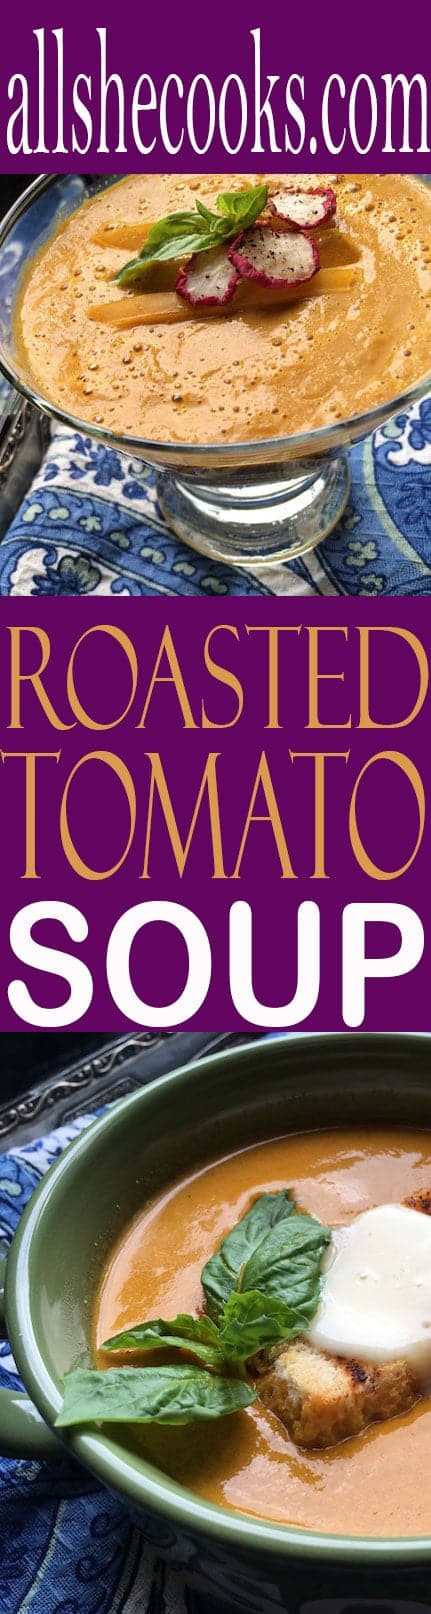 You will love this roasted tomato soup. With two variations, it can be enjoyed in any season. This grown-up version of tomato soup is a must try!